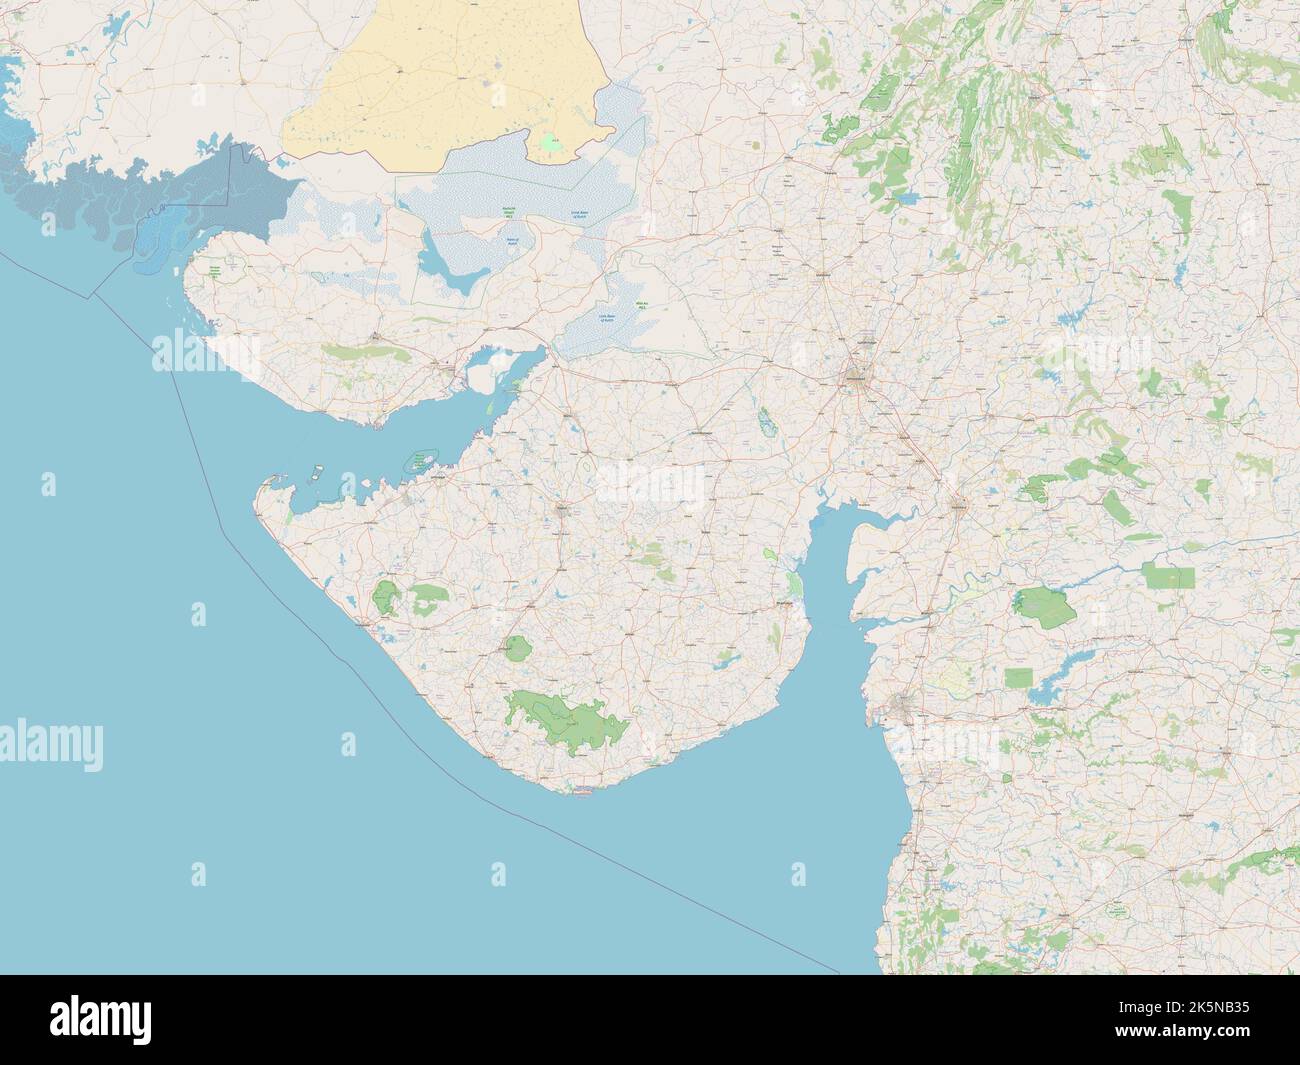 Gujarat, state of India. Open Street Map Stock Photo